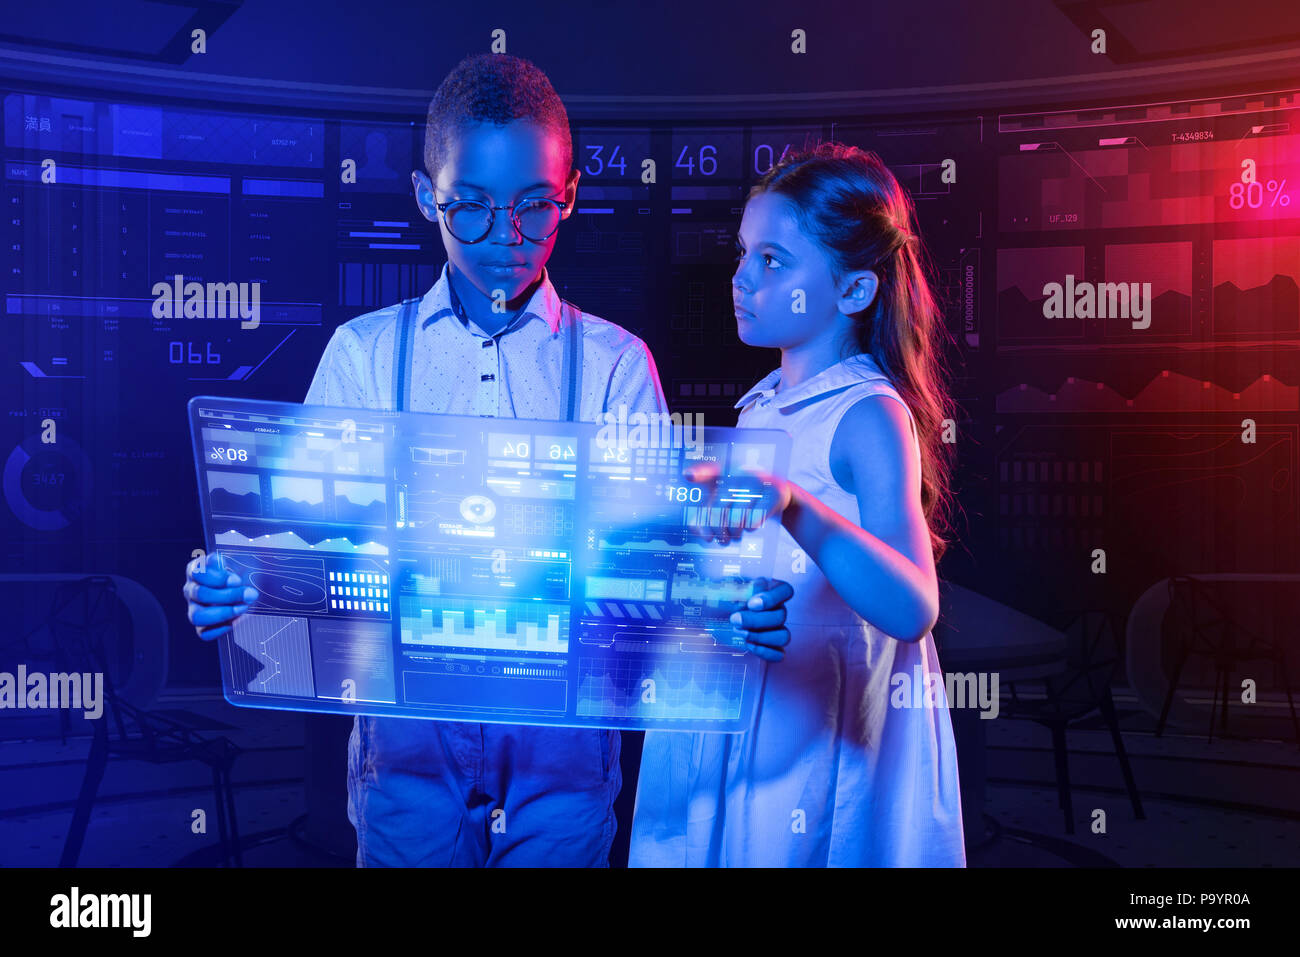 Serious boy holding a transparent device and a girl pointing at it Stock Photo